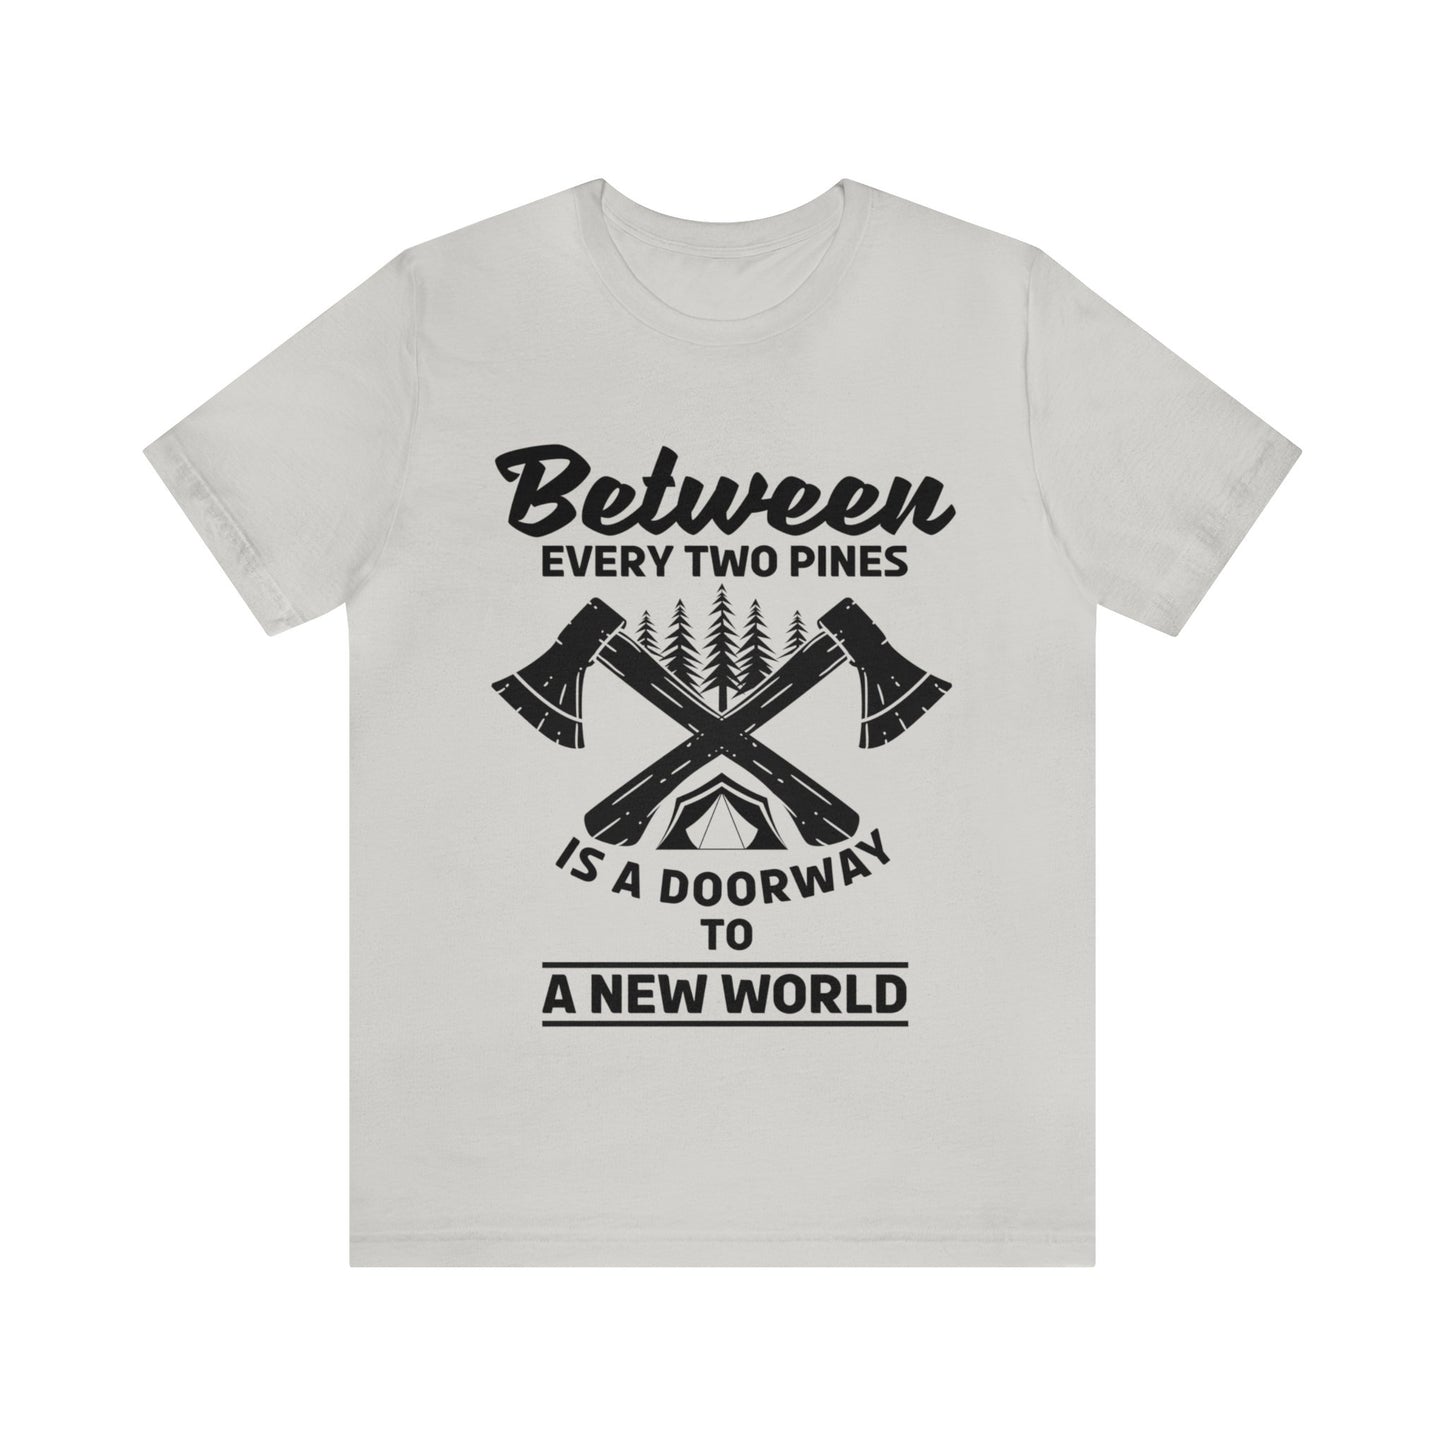 Between every two pins is a dooeway to a new world  T-Shirt